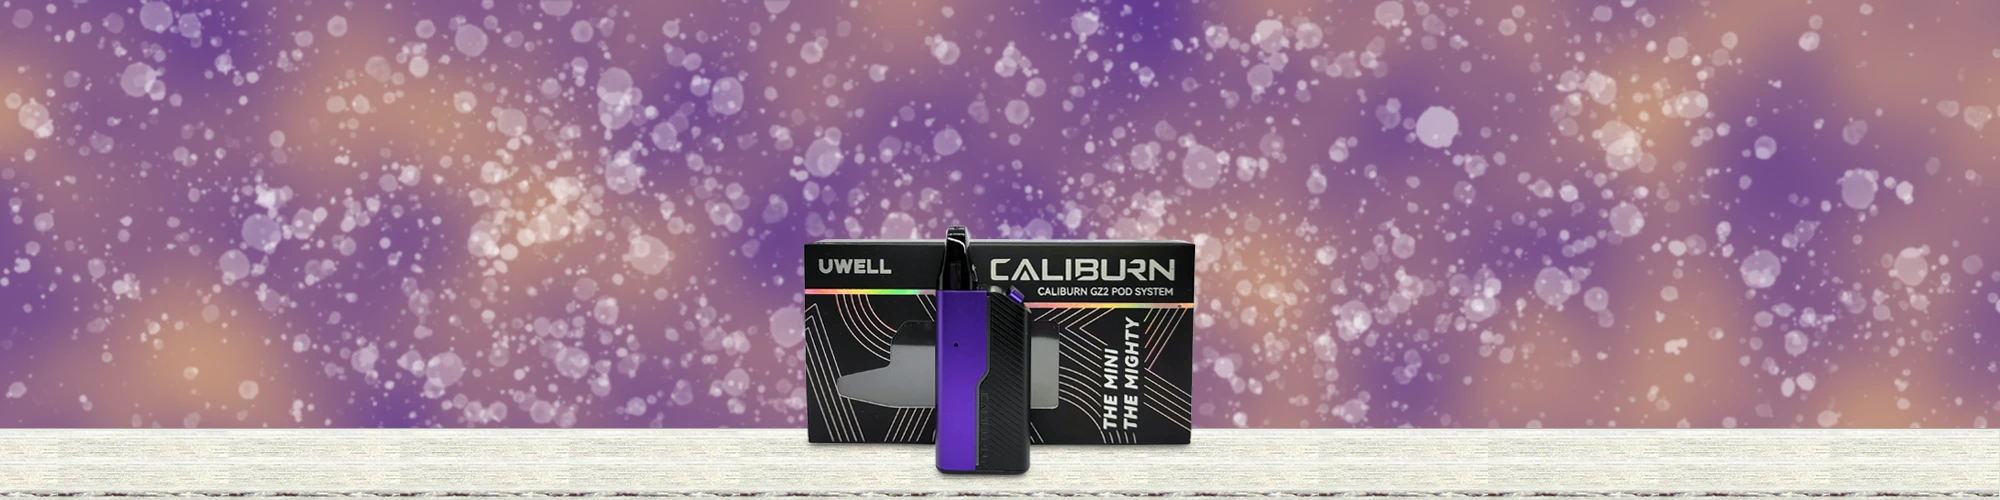 Uwell Caliburn GZ2 Review Banner